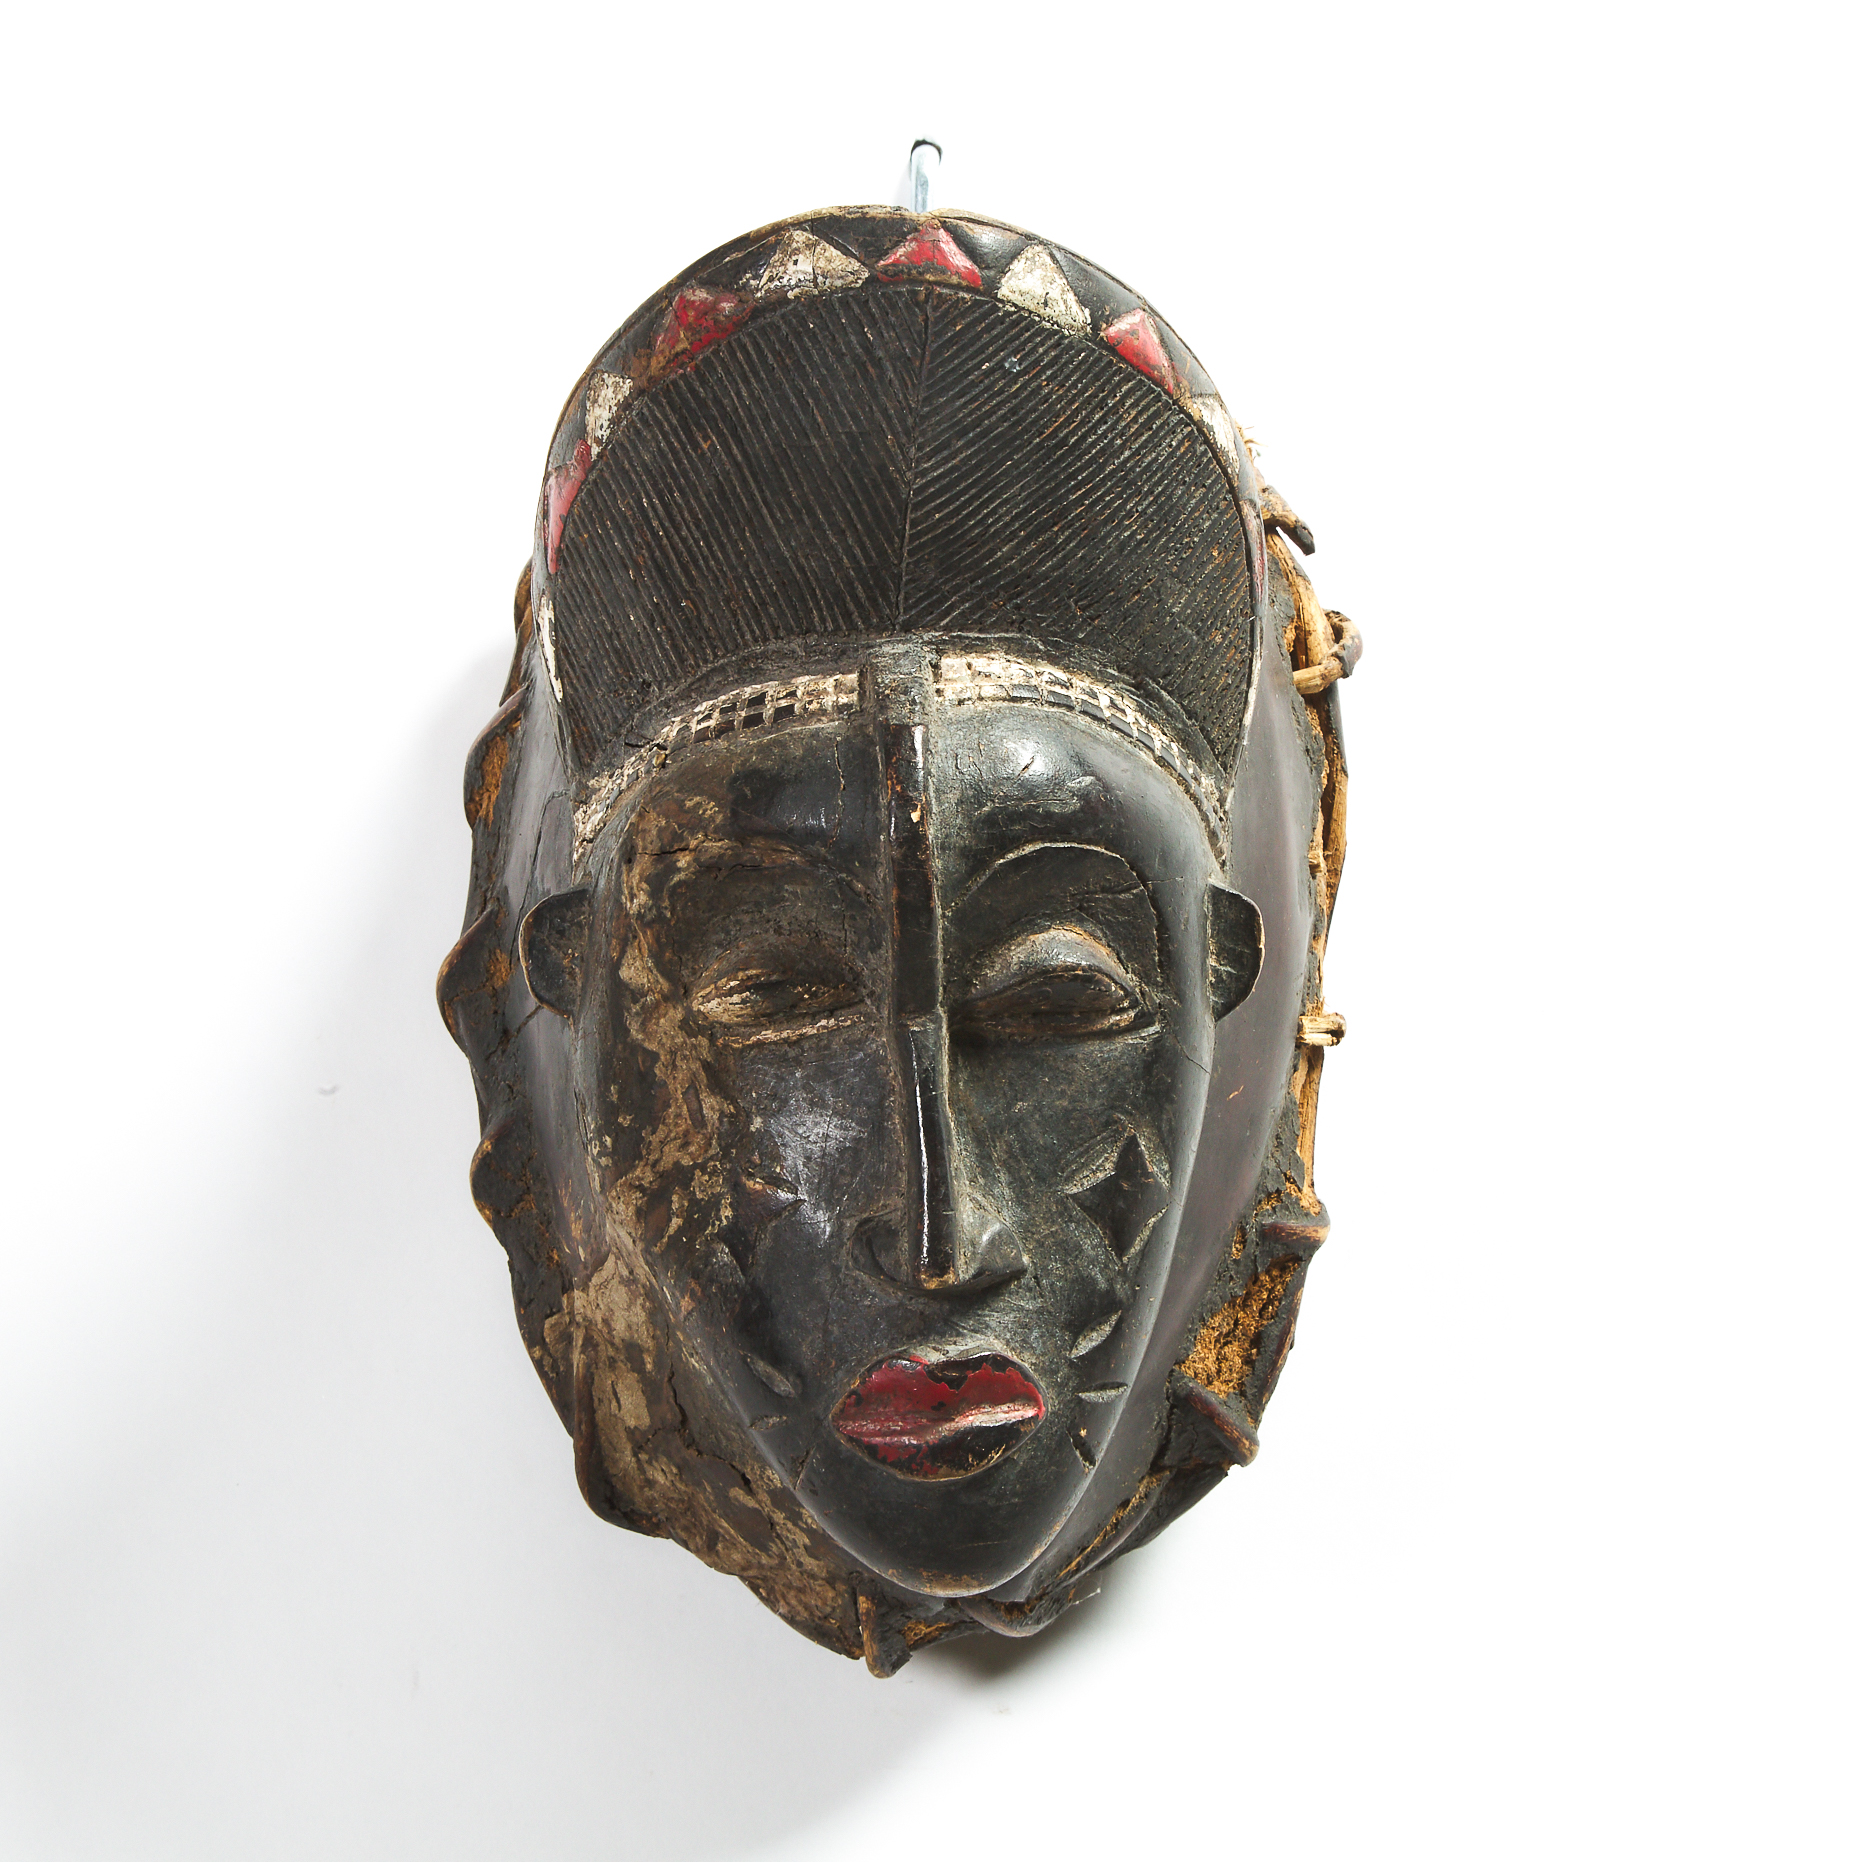 Baule Mask, Ivory Coast, West Africa,  early to mid 20th century